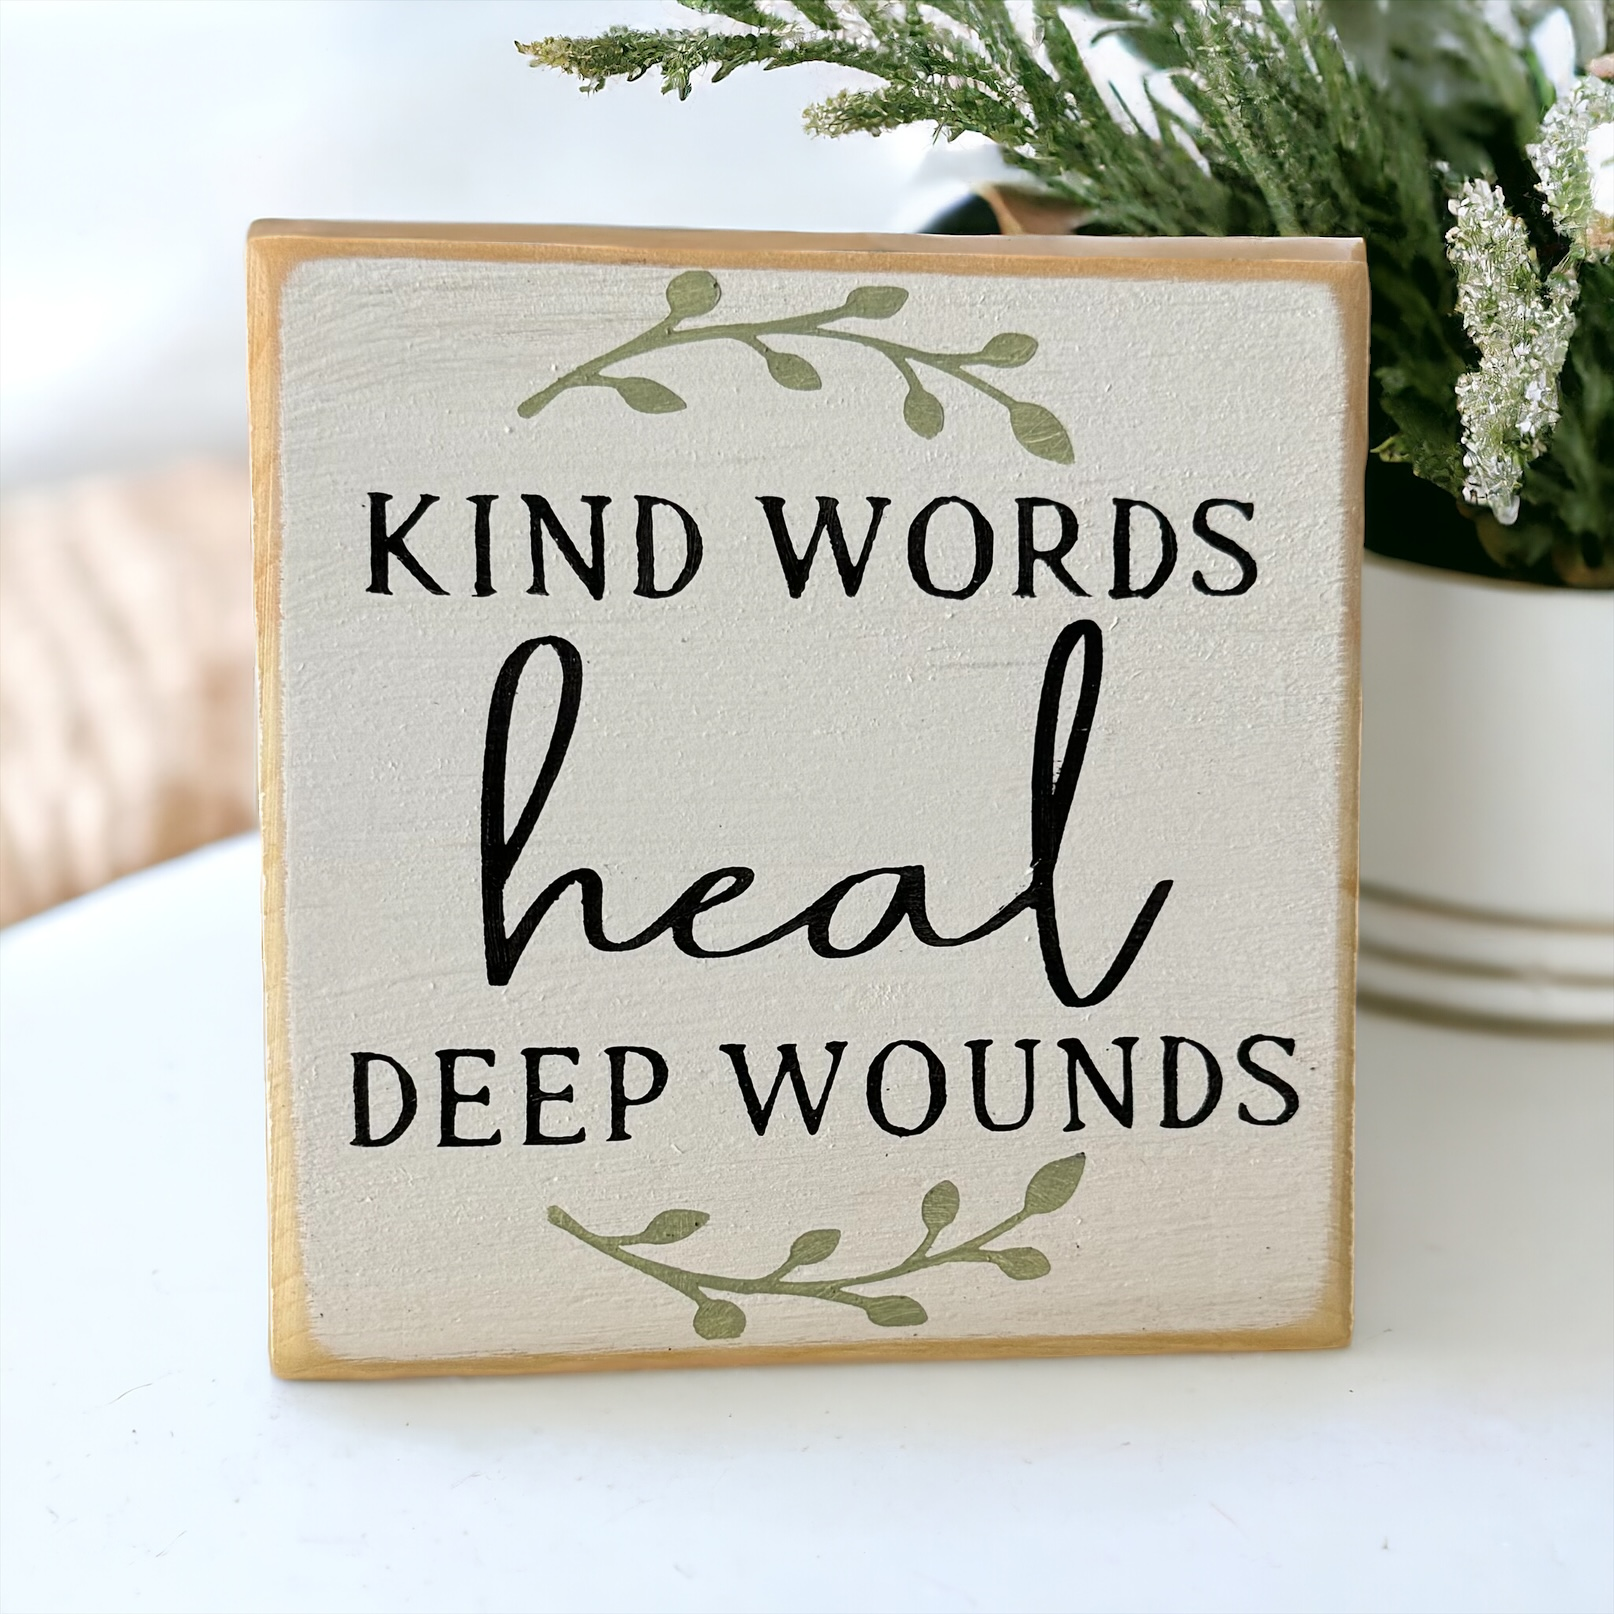 4.5" x 4.5" inspirational wood block sign with rustic black farmhouse text 'Kind words heal deep wounds' on a serene white background adorned with sage green botanical vines.